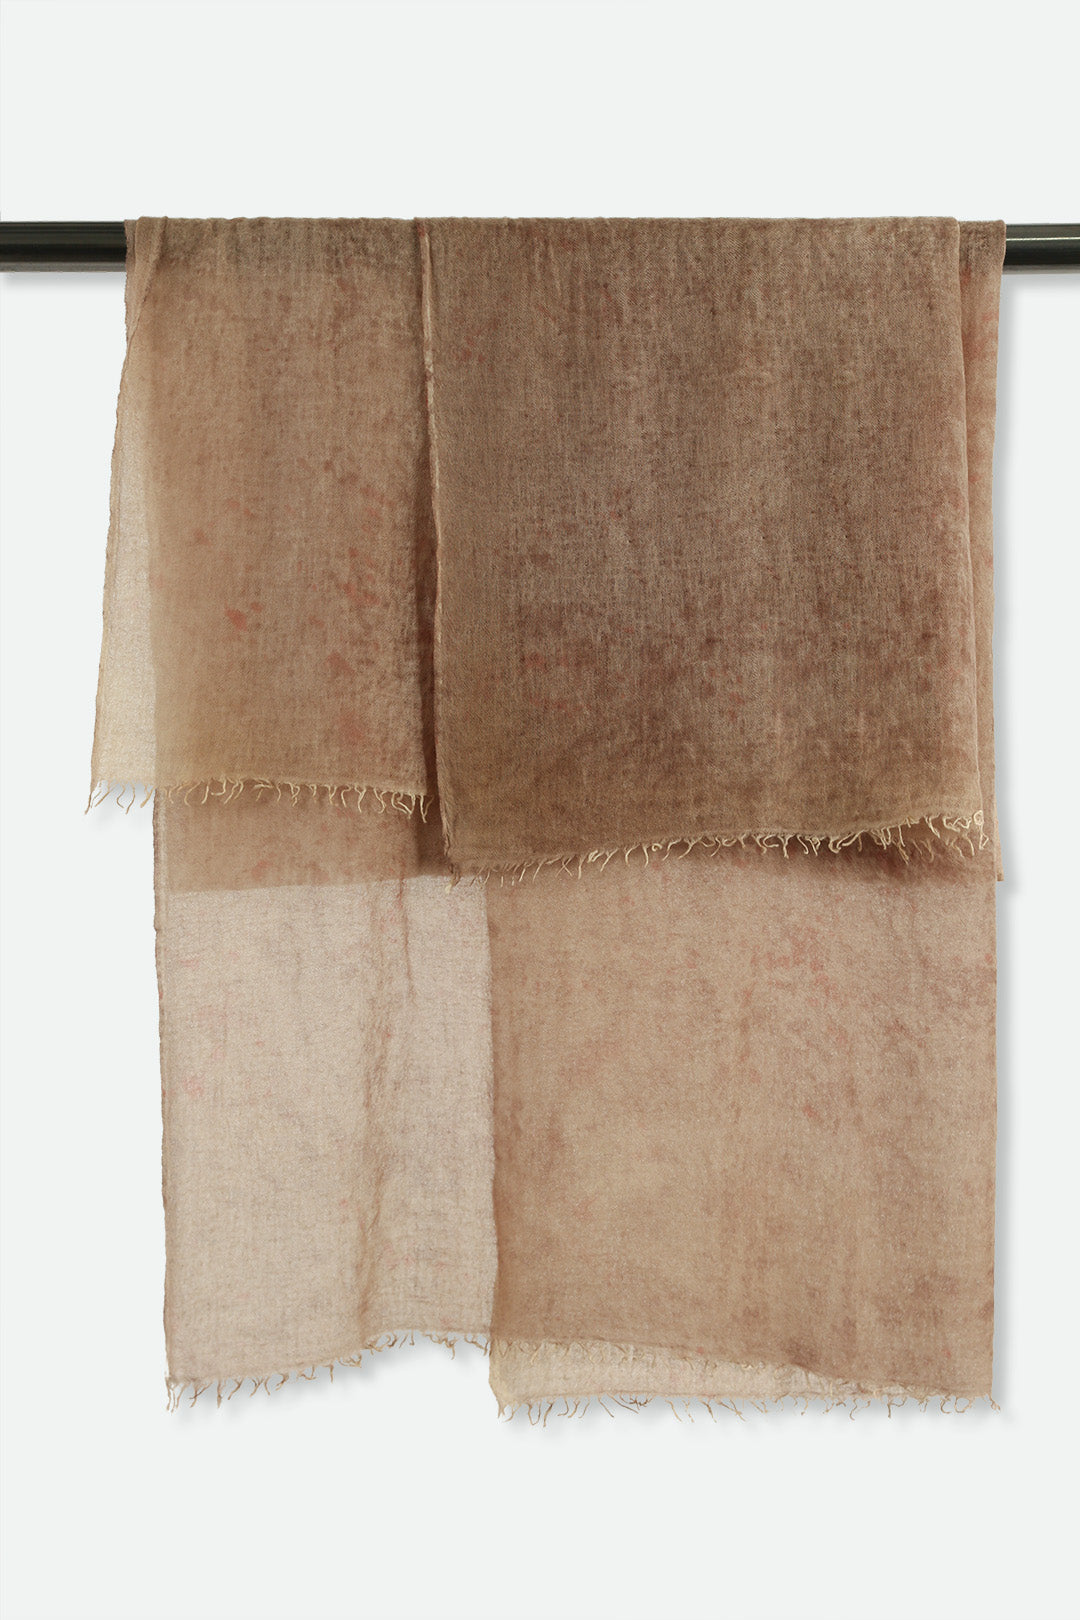 DESERT SAND SCARF IN HAND DYED CASHMERE